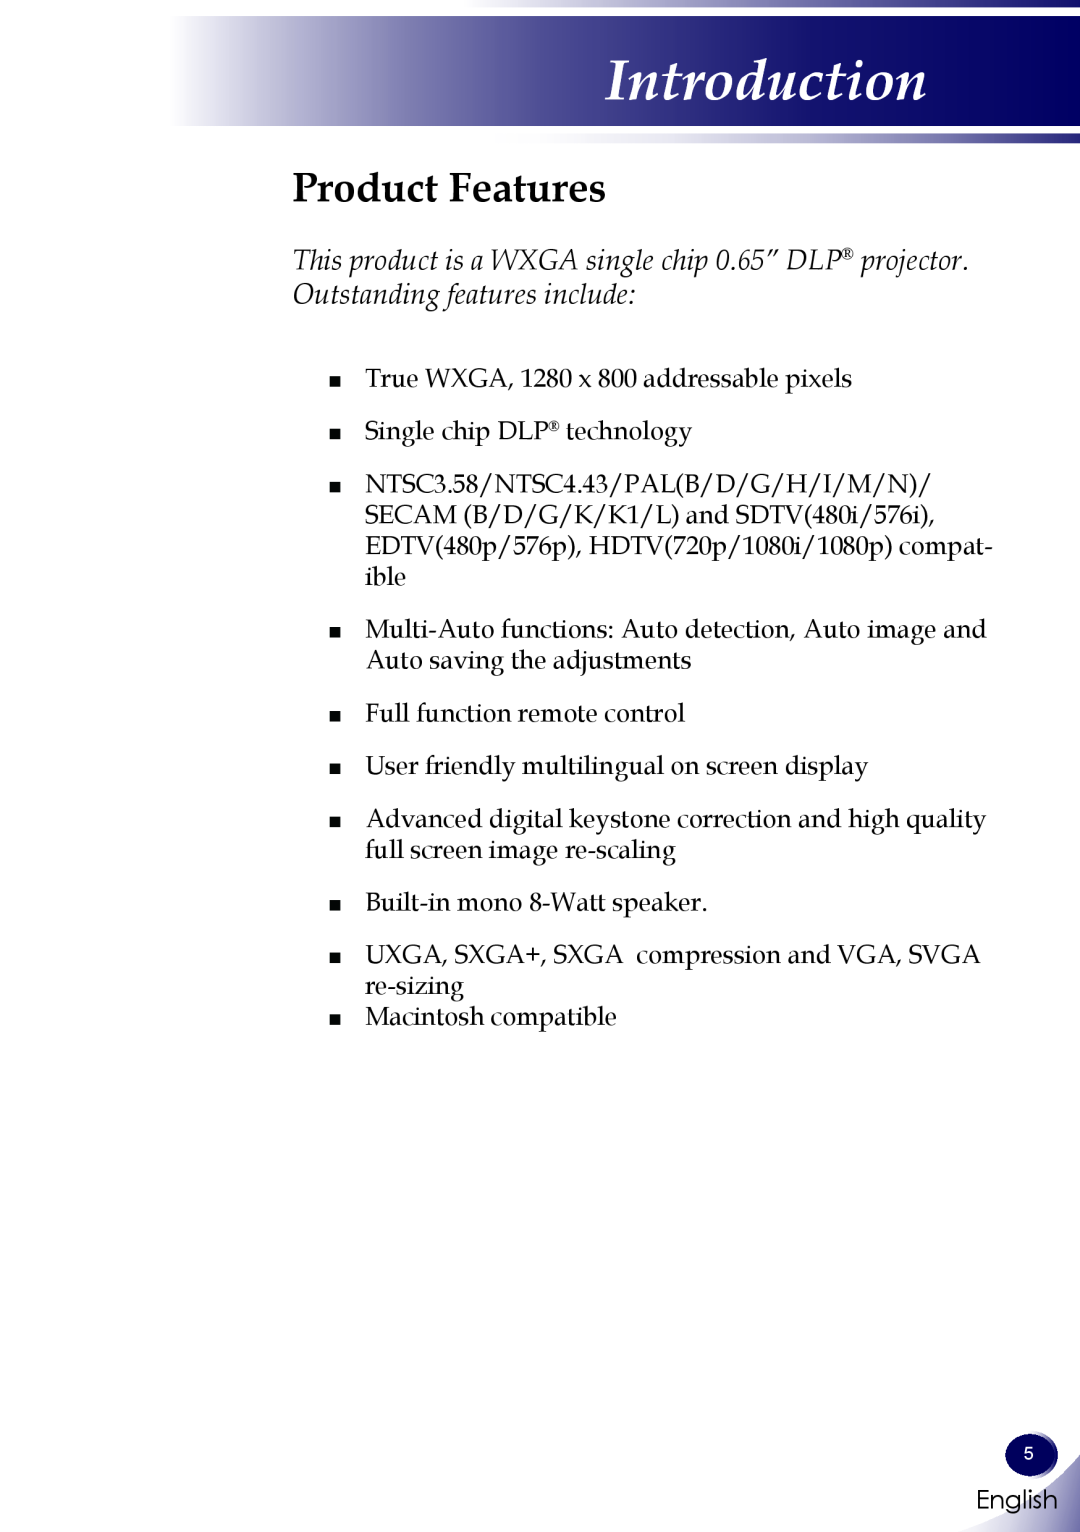 Sanyo PDG-DWL100 owner manual Introduction, Product Features, English 